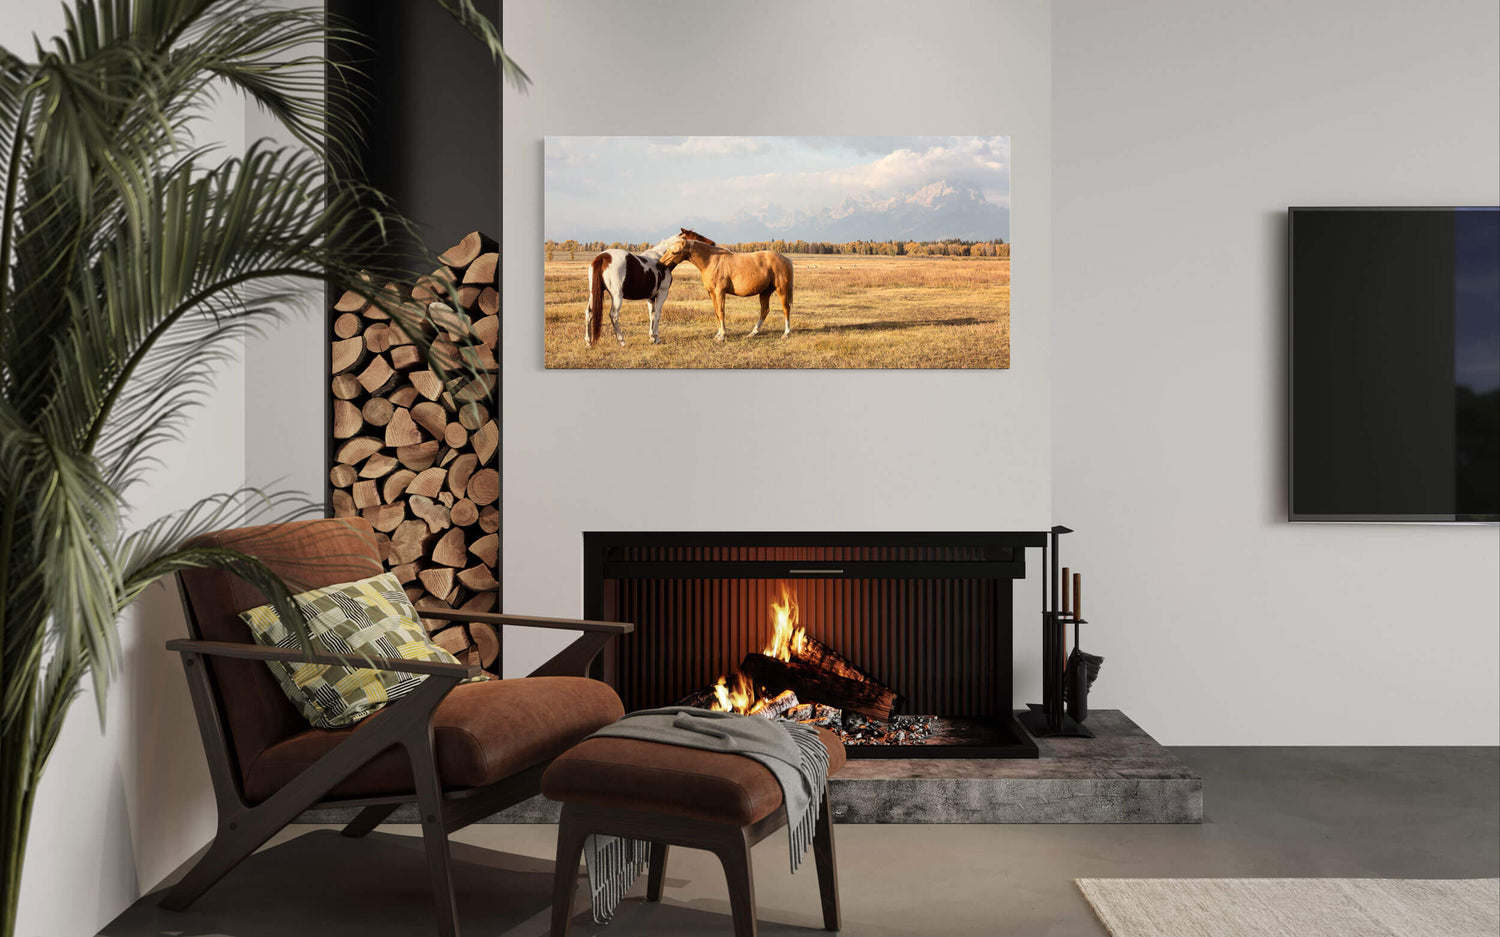 A piece of Jackson Hole art showing horses in Grand Teton National Park hangs in a living room.